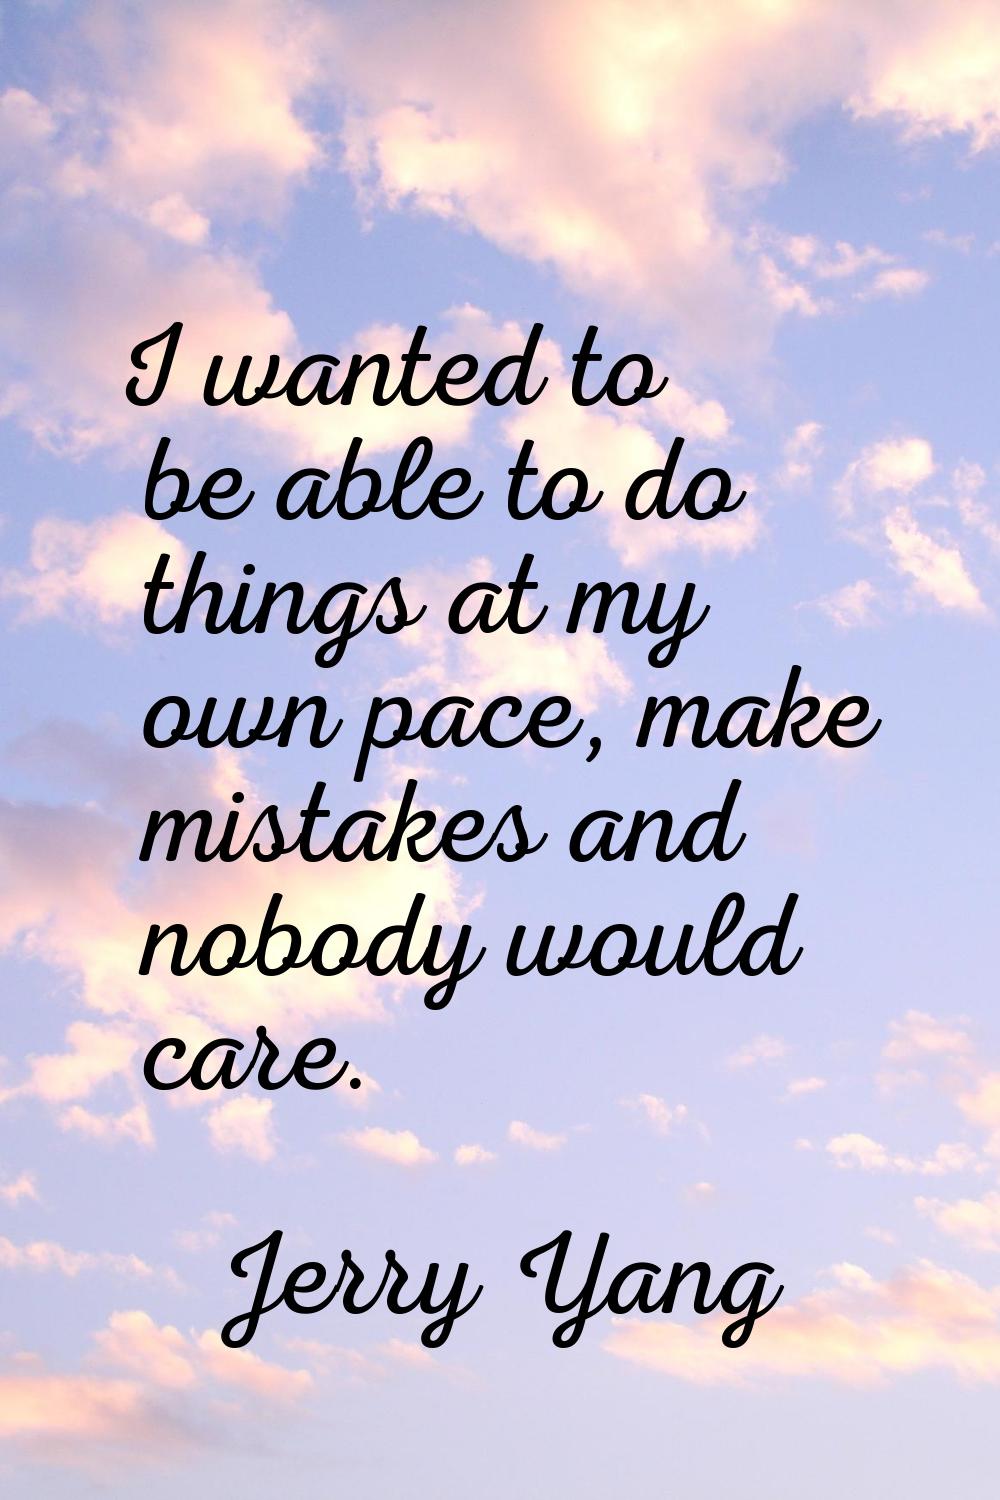 I wanted to be able to do things at my own pace, make mistakes and nobody would care.